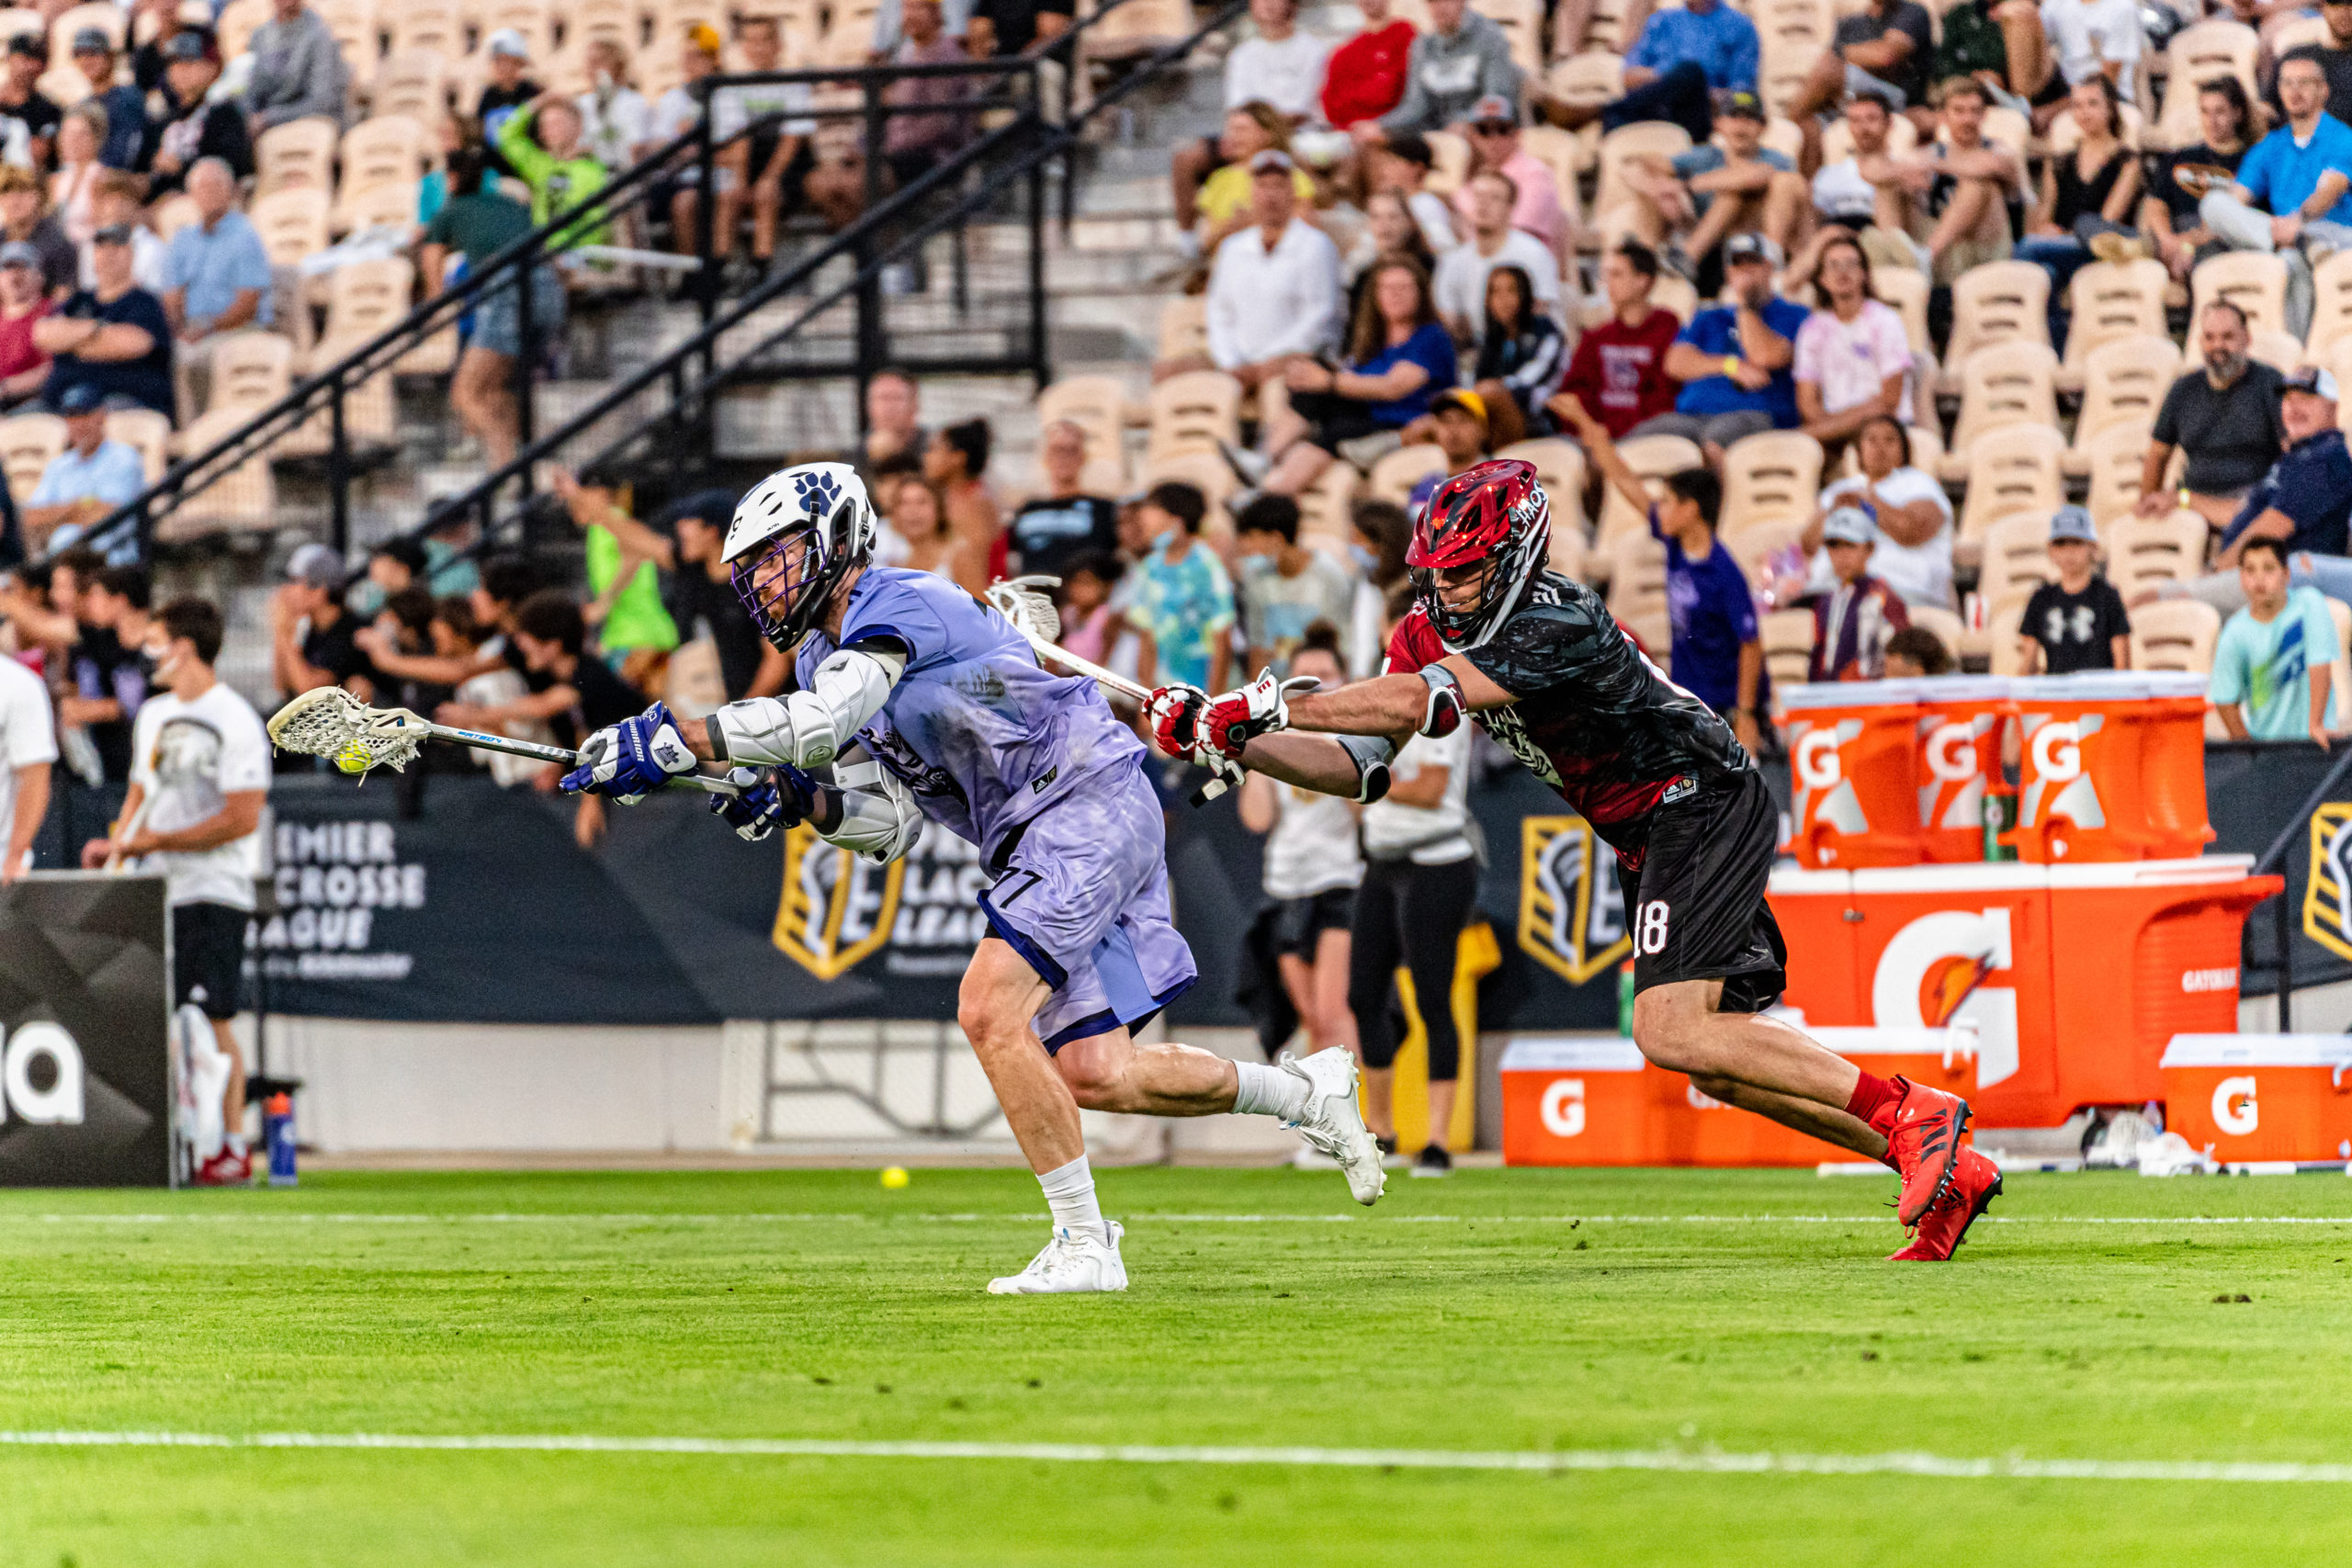 Premier Lacrosse League Pulls Out All the Stops for Inaugural Weekend